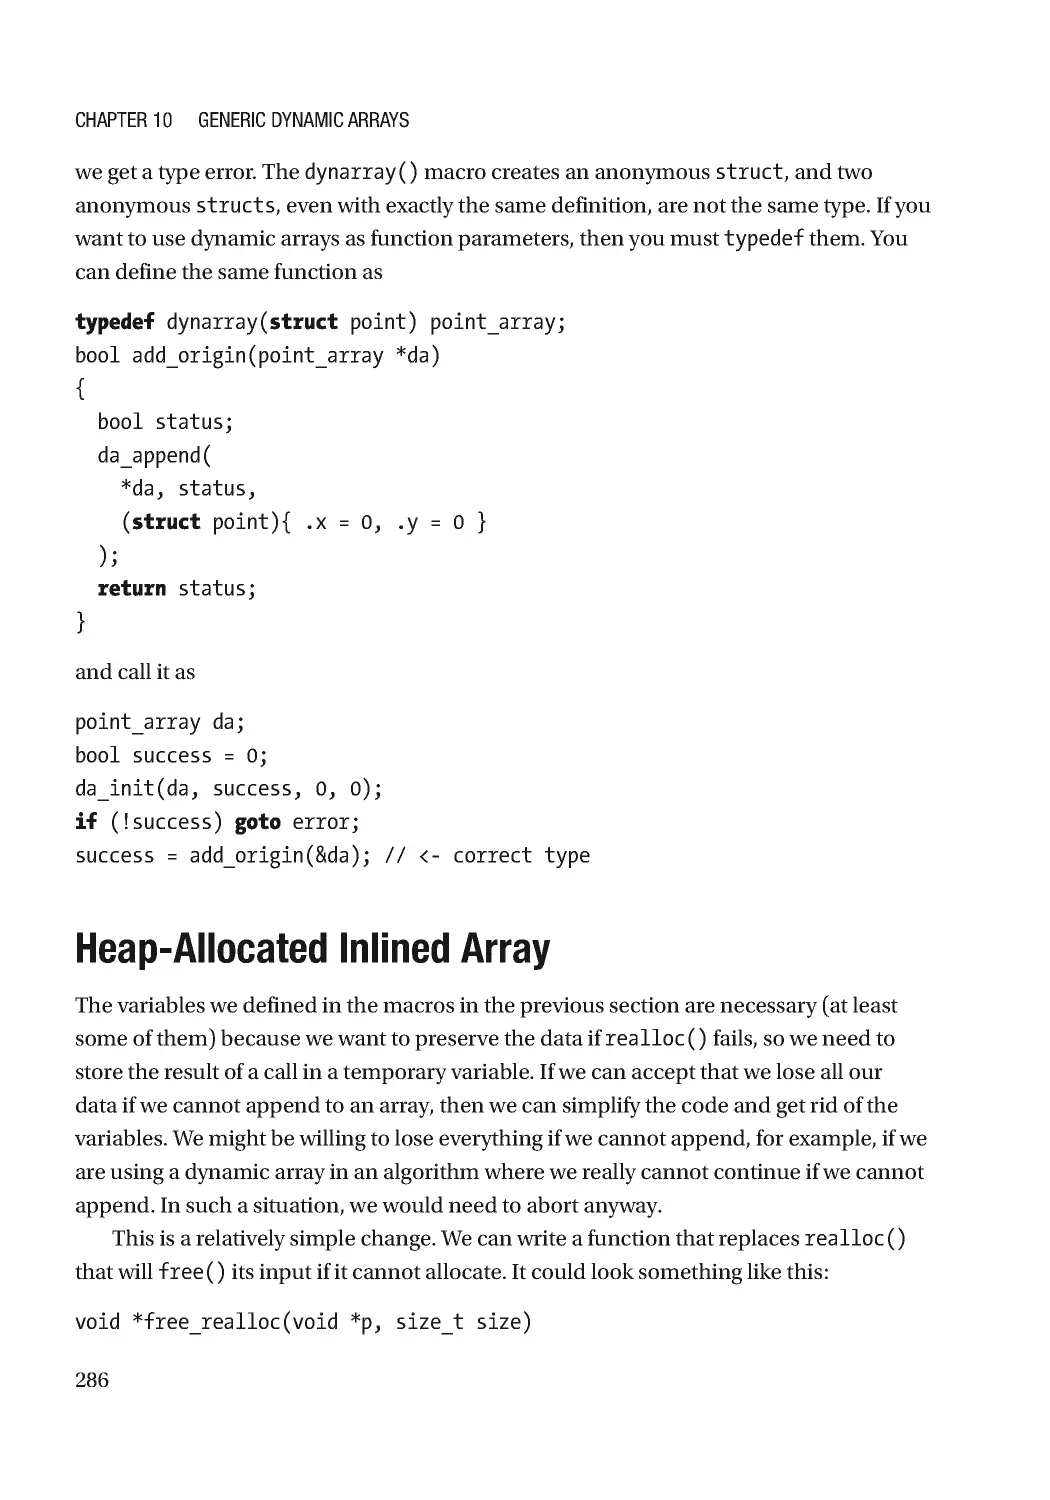 Heap-Allocated Inlined Array